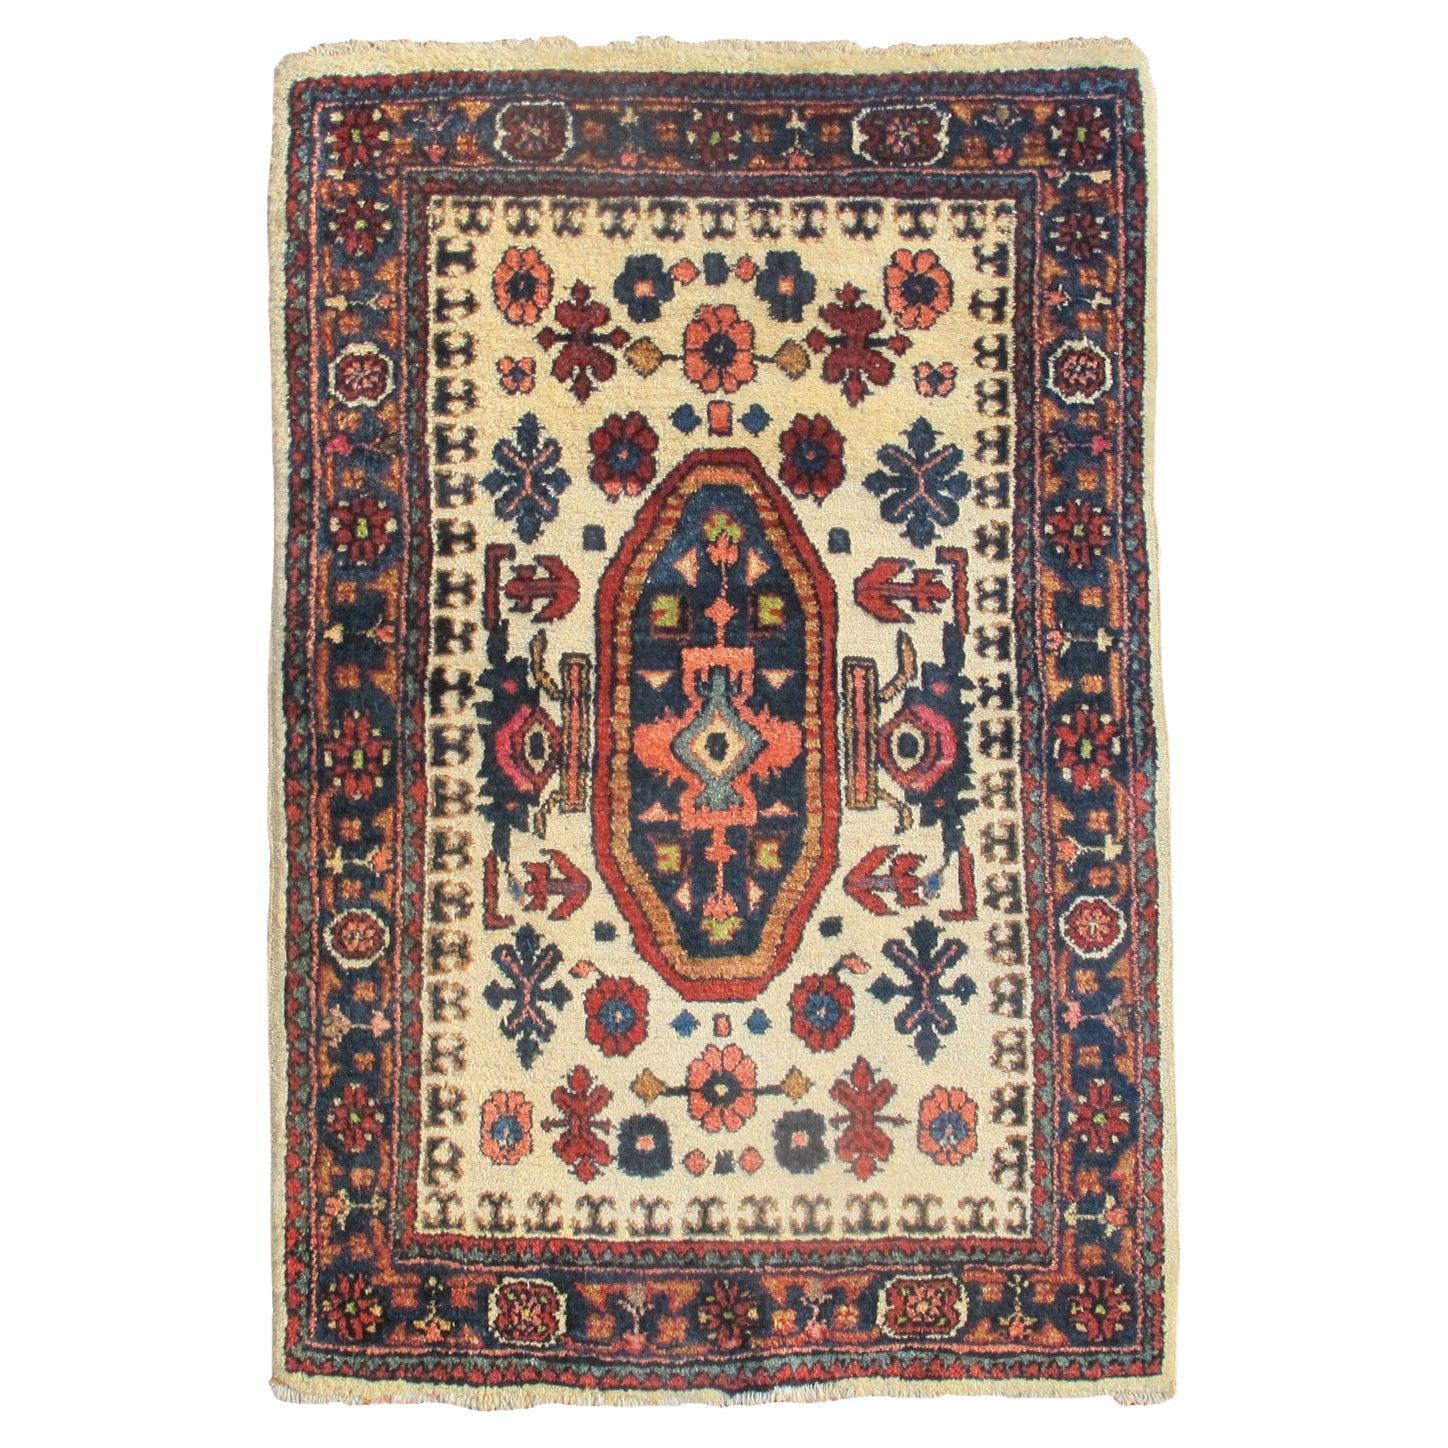 Antique Bibikabad Rug, Early 20th Century